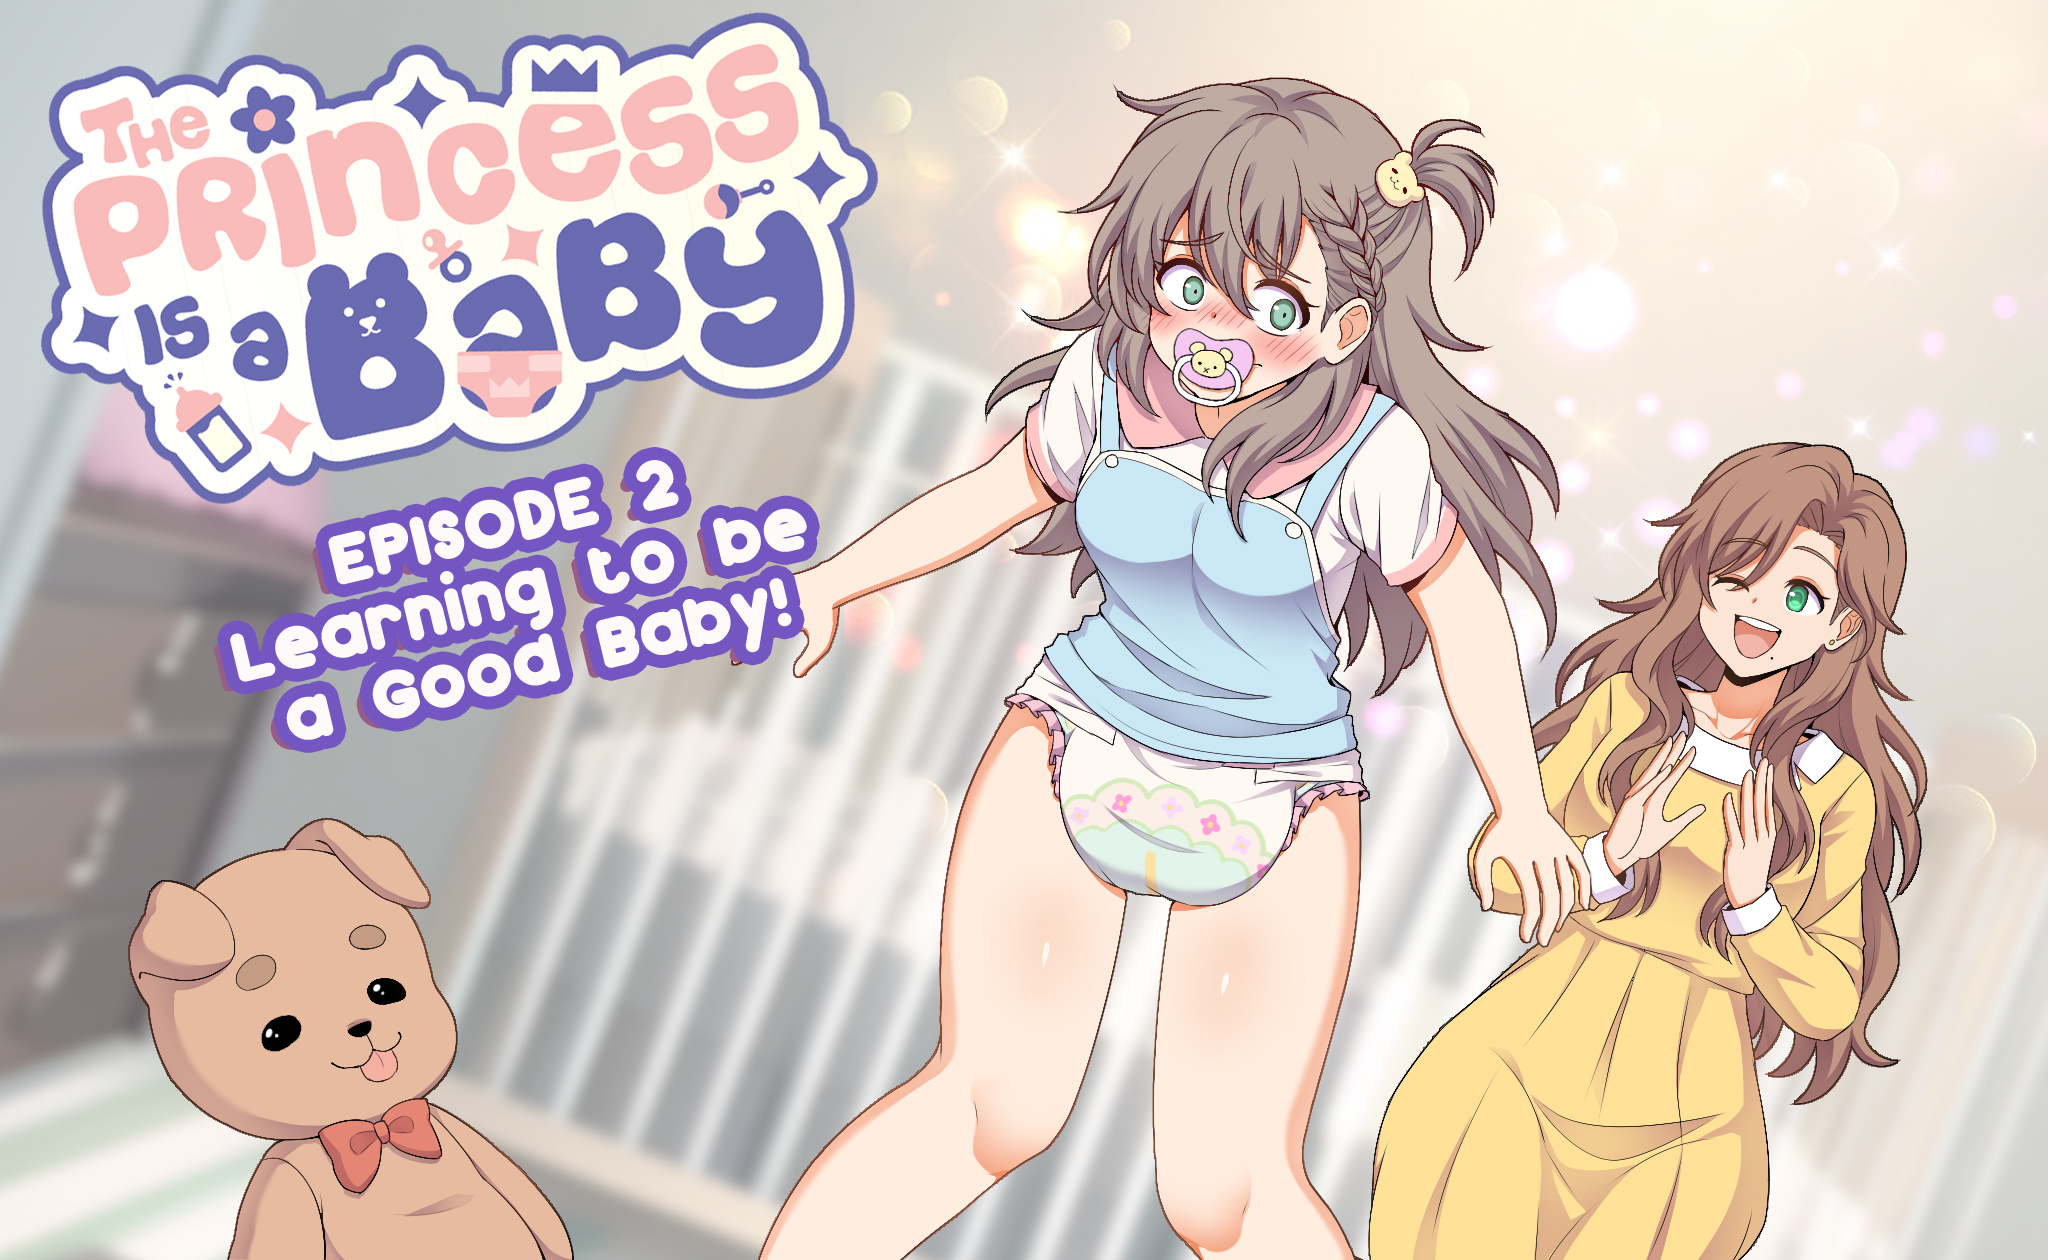 Volume 2 - Learn To Be a Good Baby!